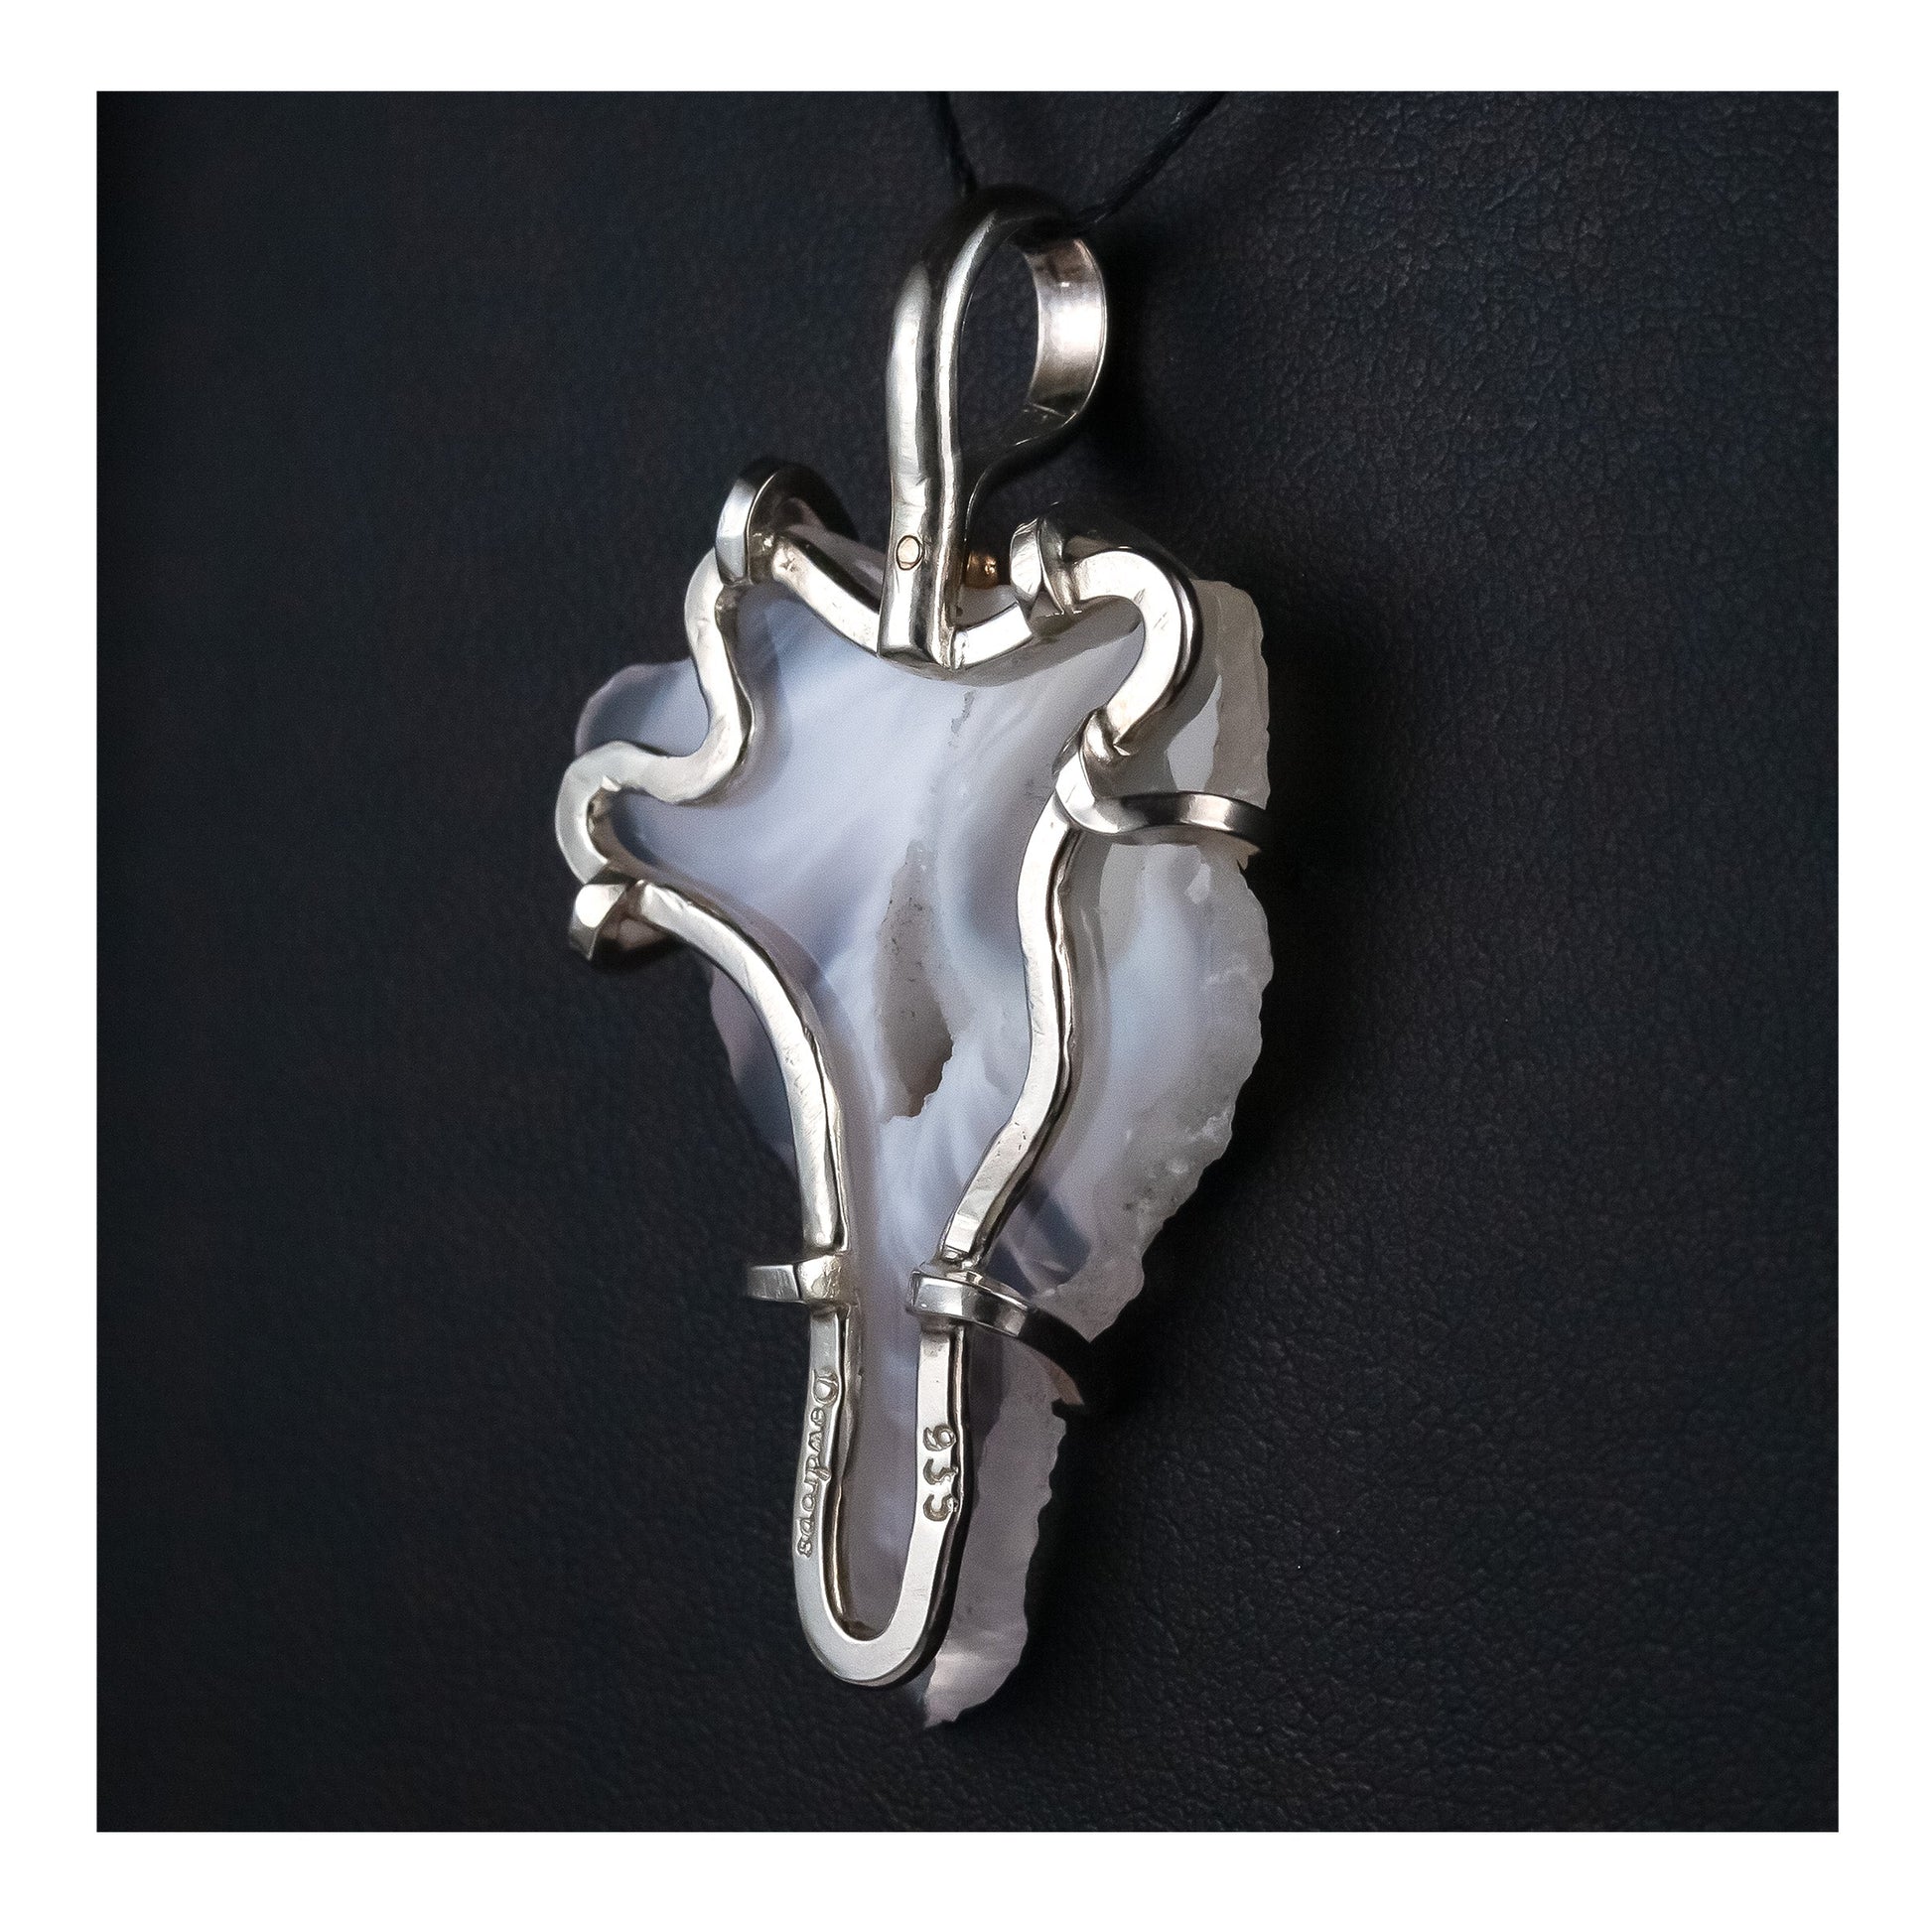 A freeform Agate slice. Tarnish-resistant Argentium Silver. Pendant with Prong setting. Black cord. agate stone necklace. Agate Clouds Silver Pendant